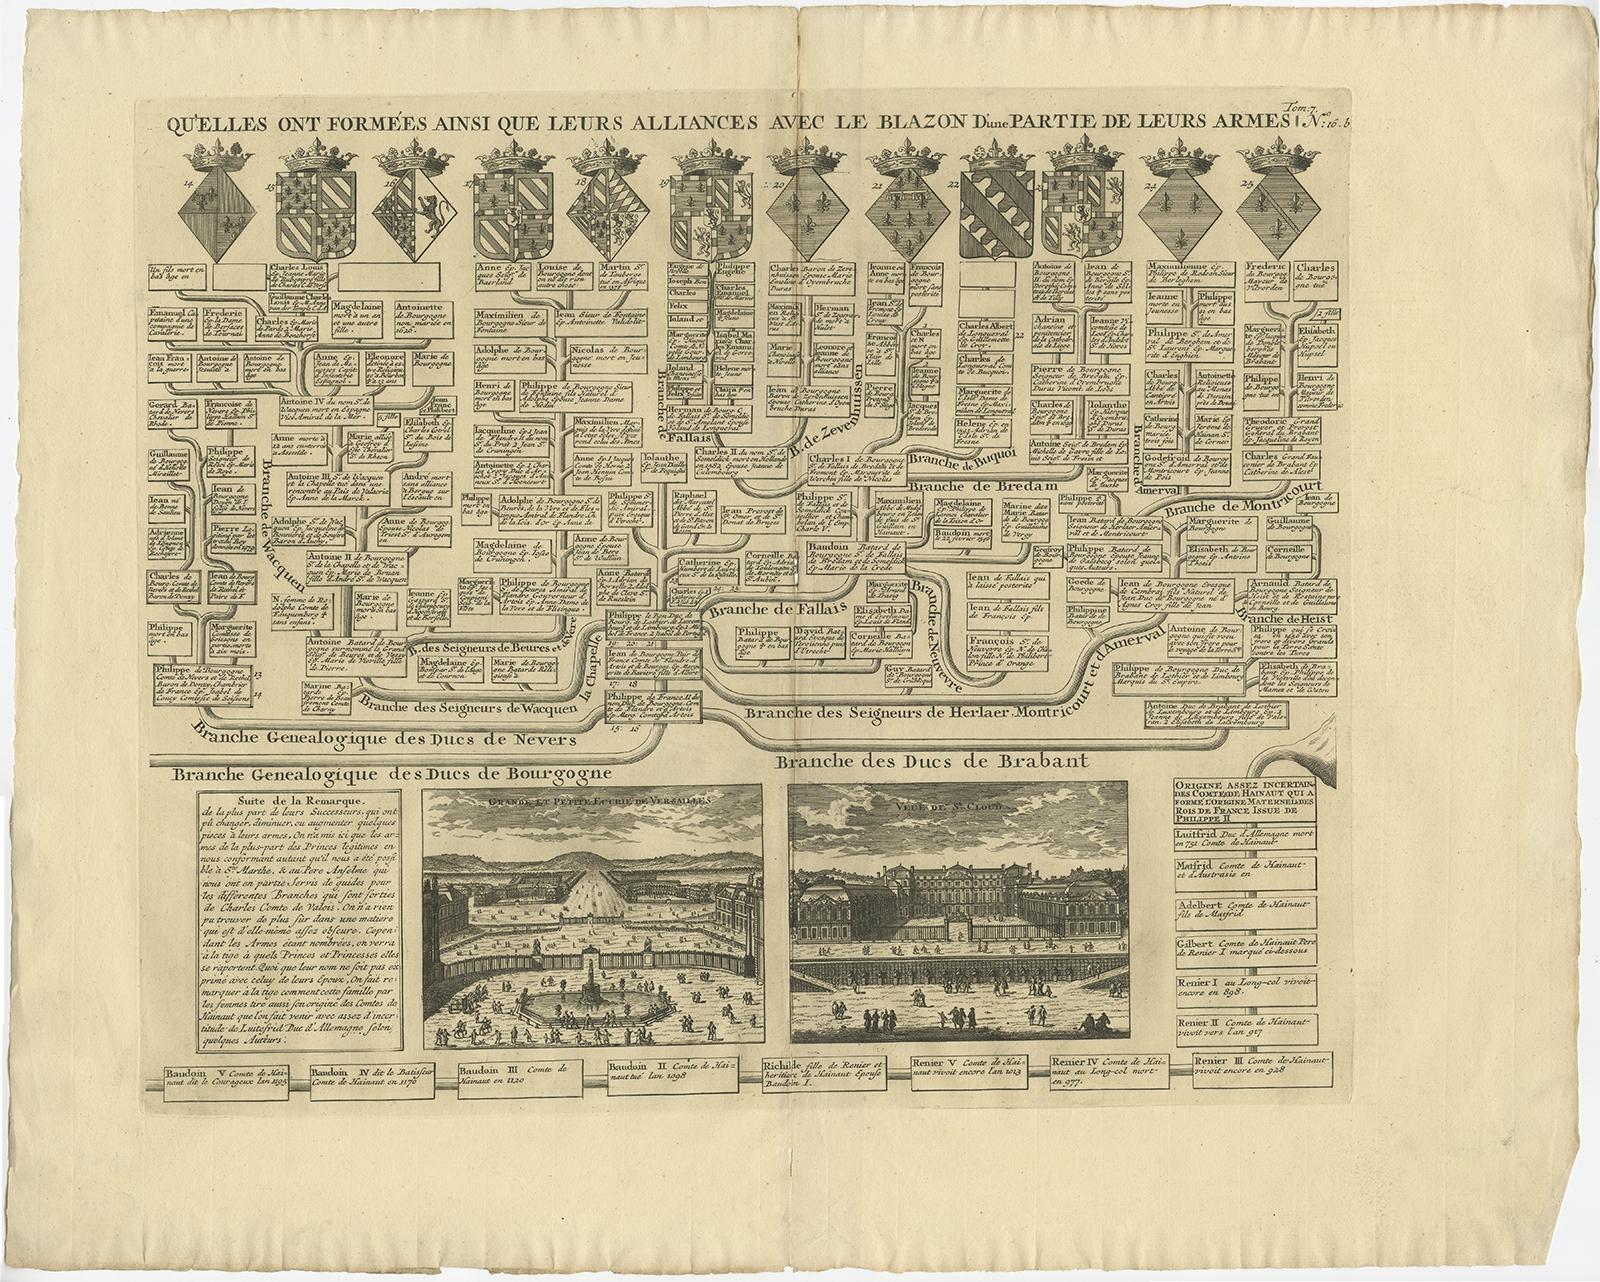 Antique print titled 'Nouvelle Carte Genealogique des Branches du Cote Gauche (..)'. 

Set of two prints with a chart of the left branch of the genealogy of the Valois House, and the various branches formed through alliances, each with its coat of